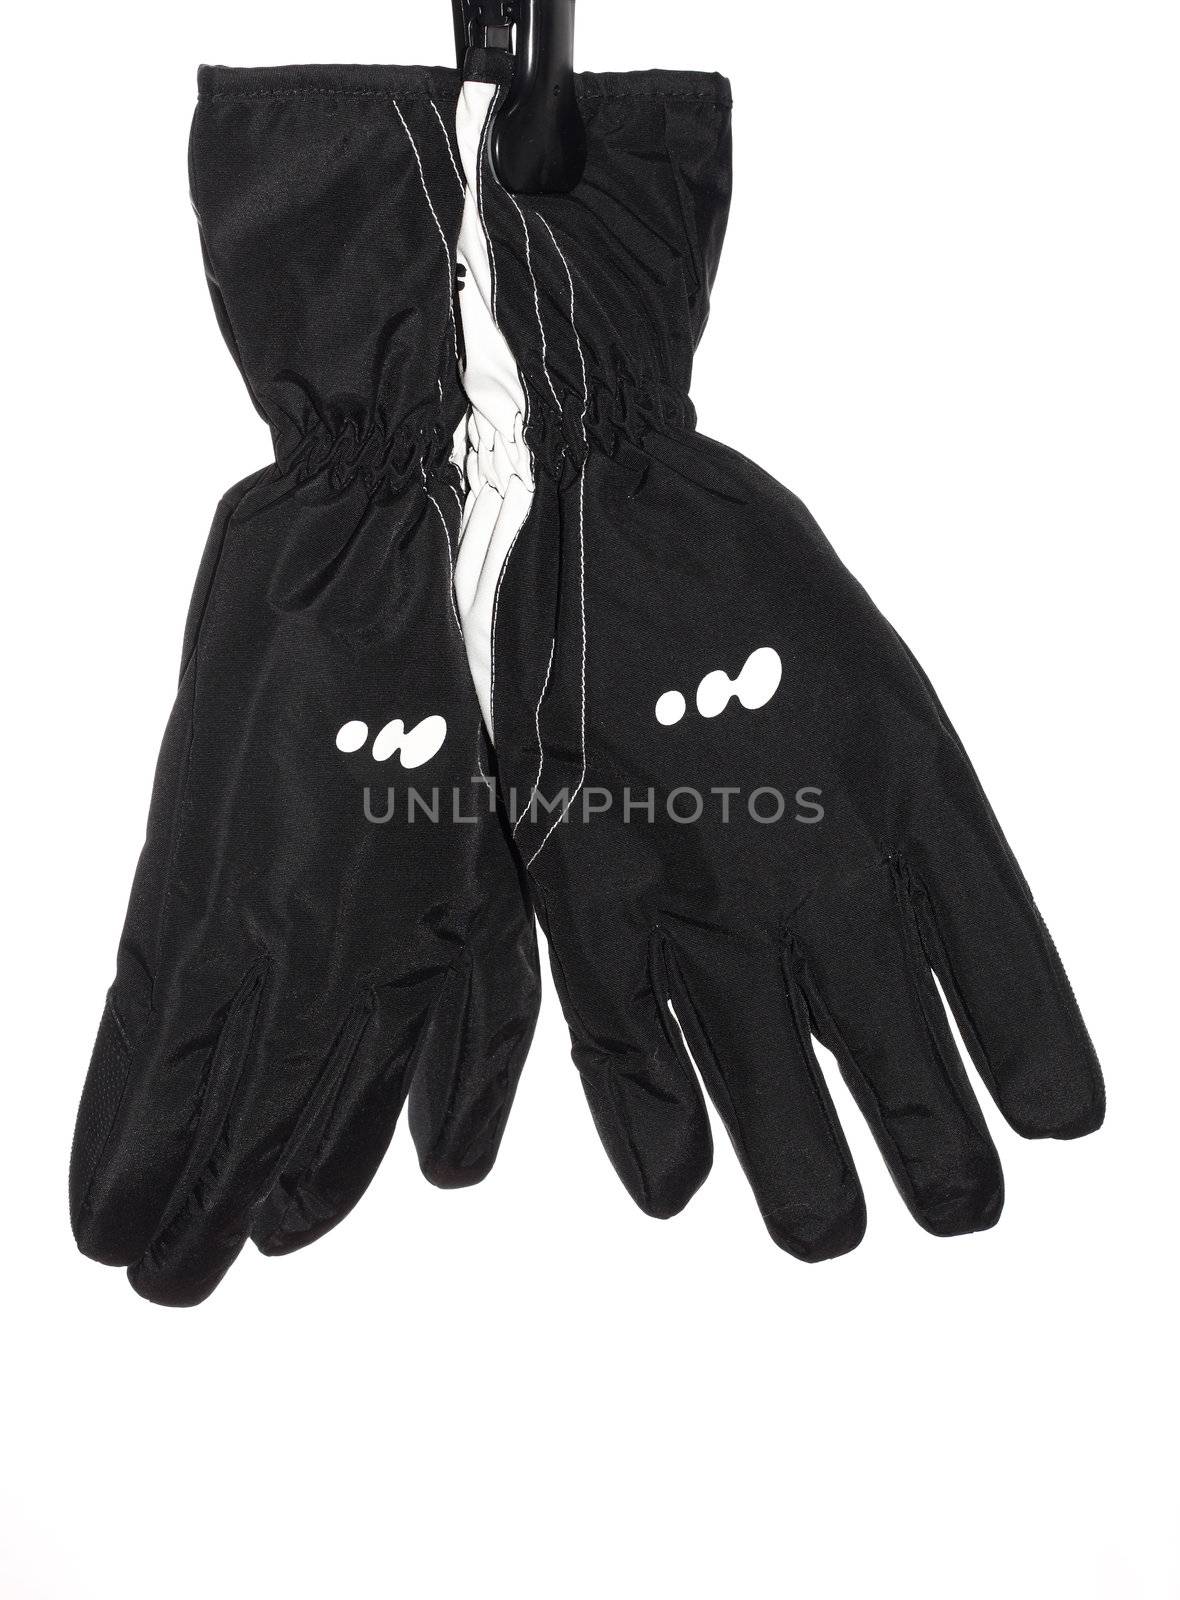 Gloves for employment by a snowboard or mountain-skiing sports by fedlog